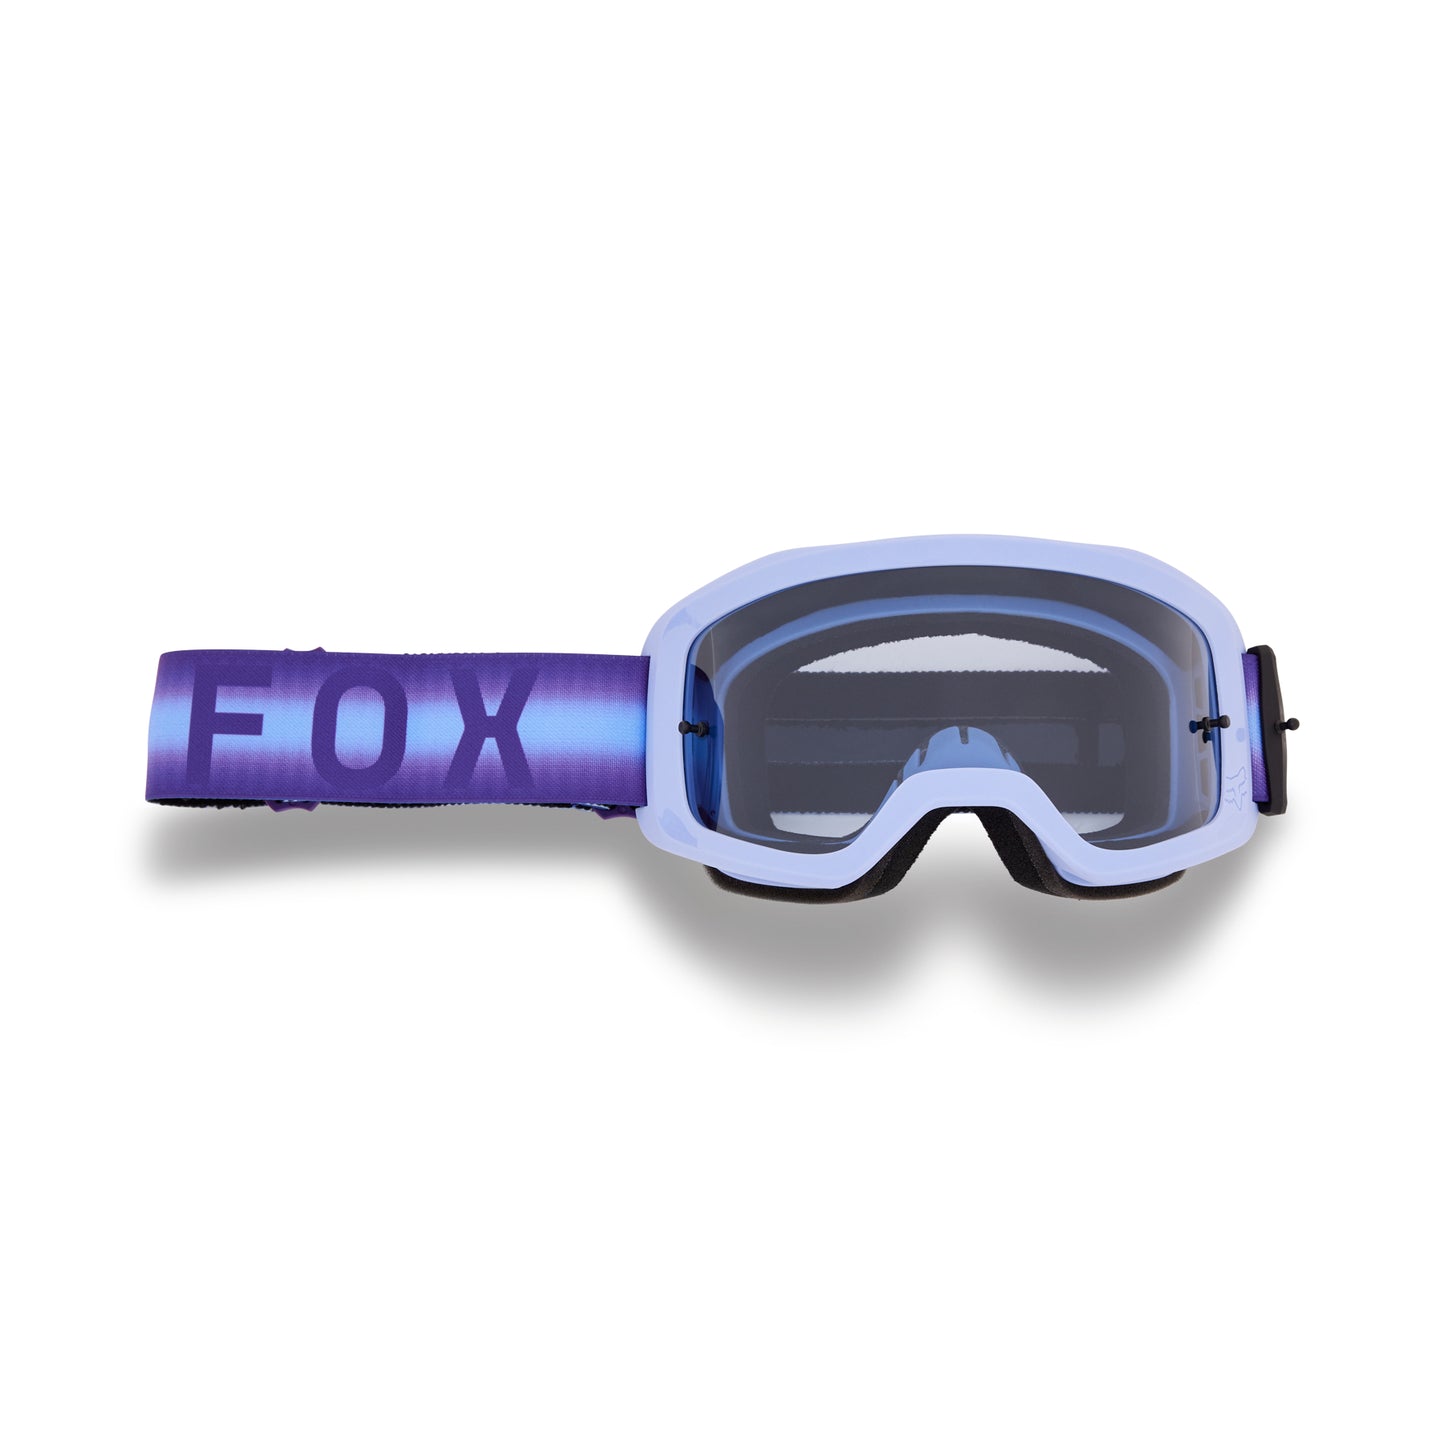 Fox Main Interfere Goggles - One Size Fits Most - Purple - Smoke Grey Lens - Image 1